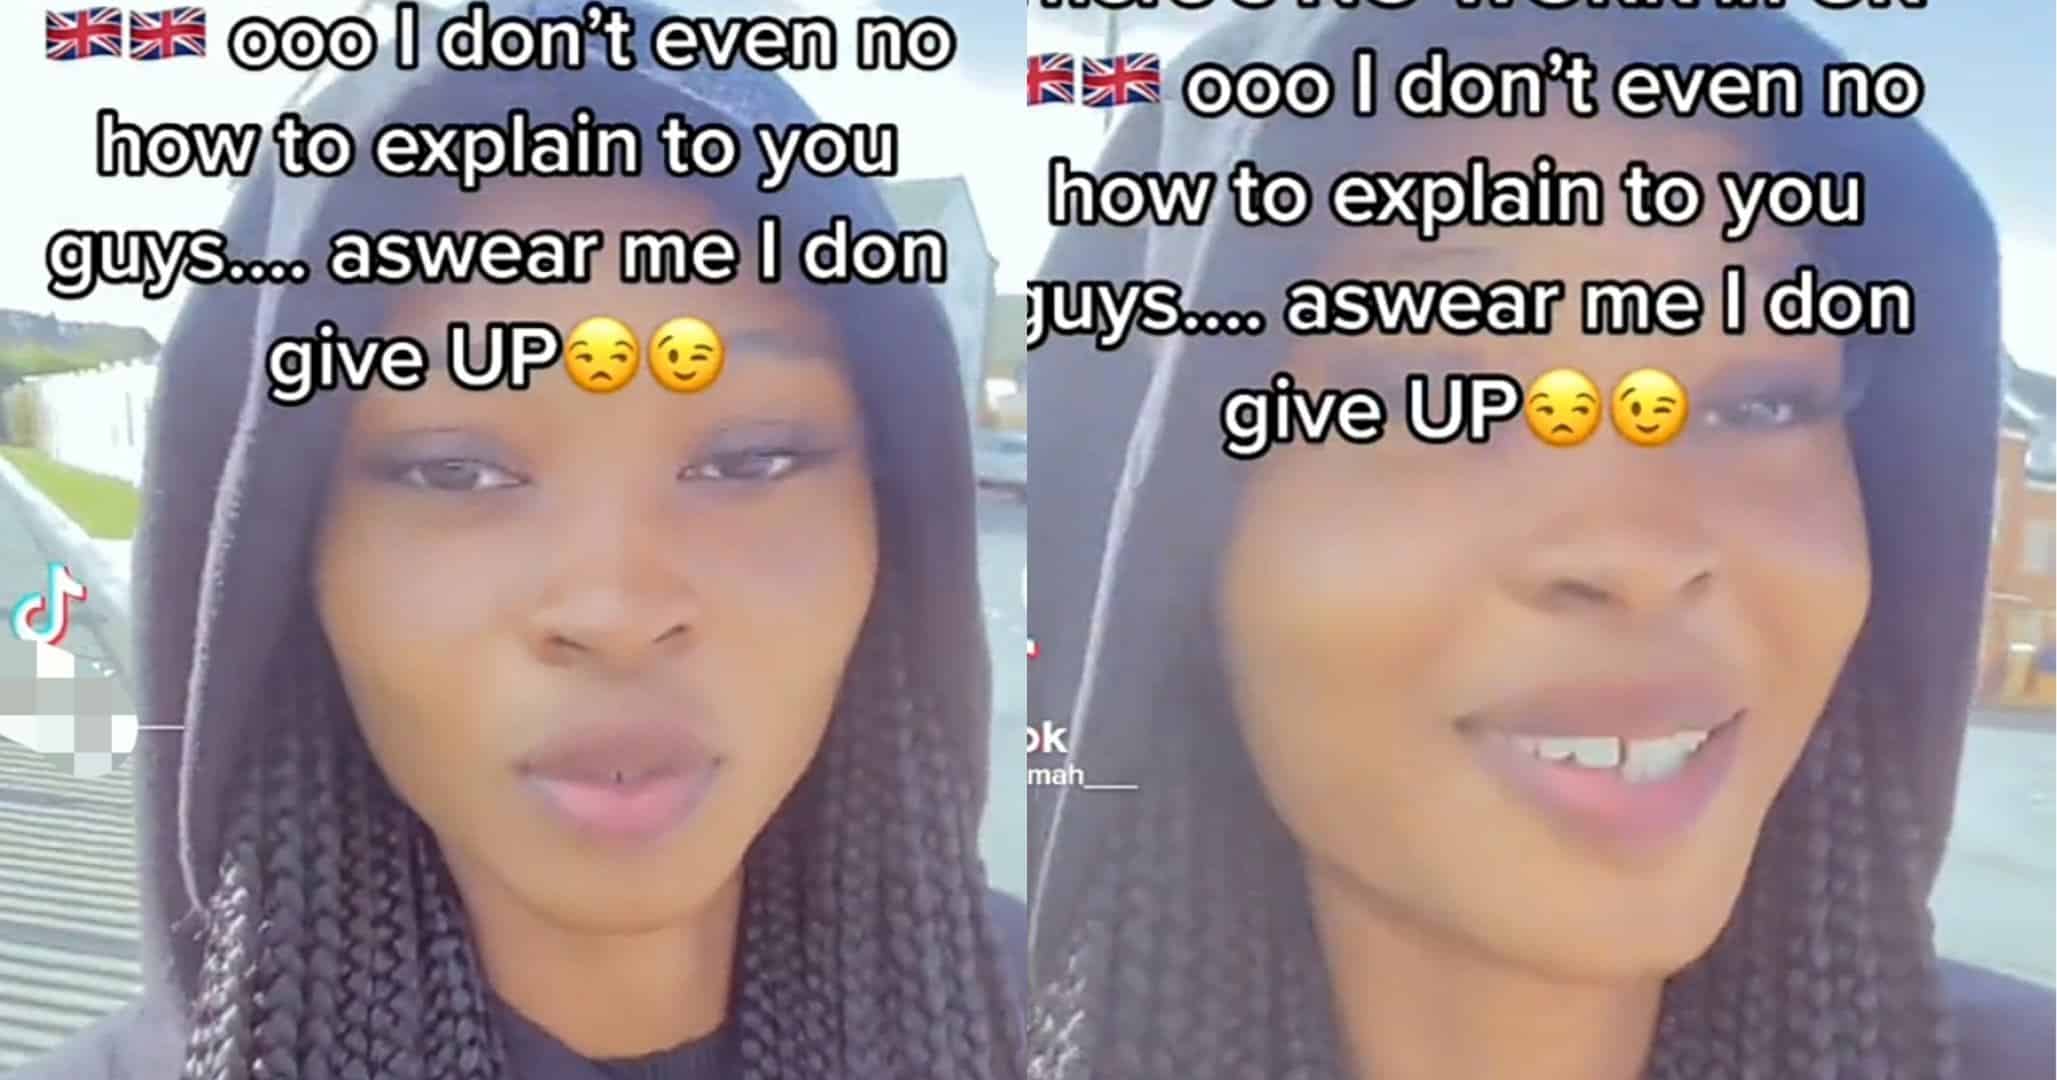 "There's no work in UK" – Lady expresses regret after relocating for greener pastures (Video)